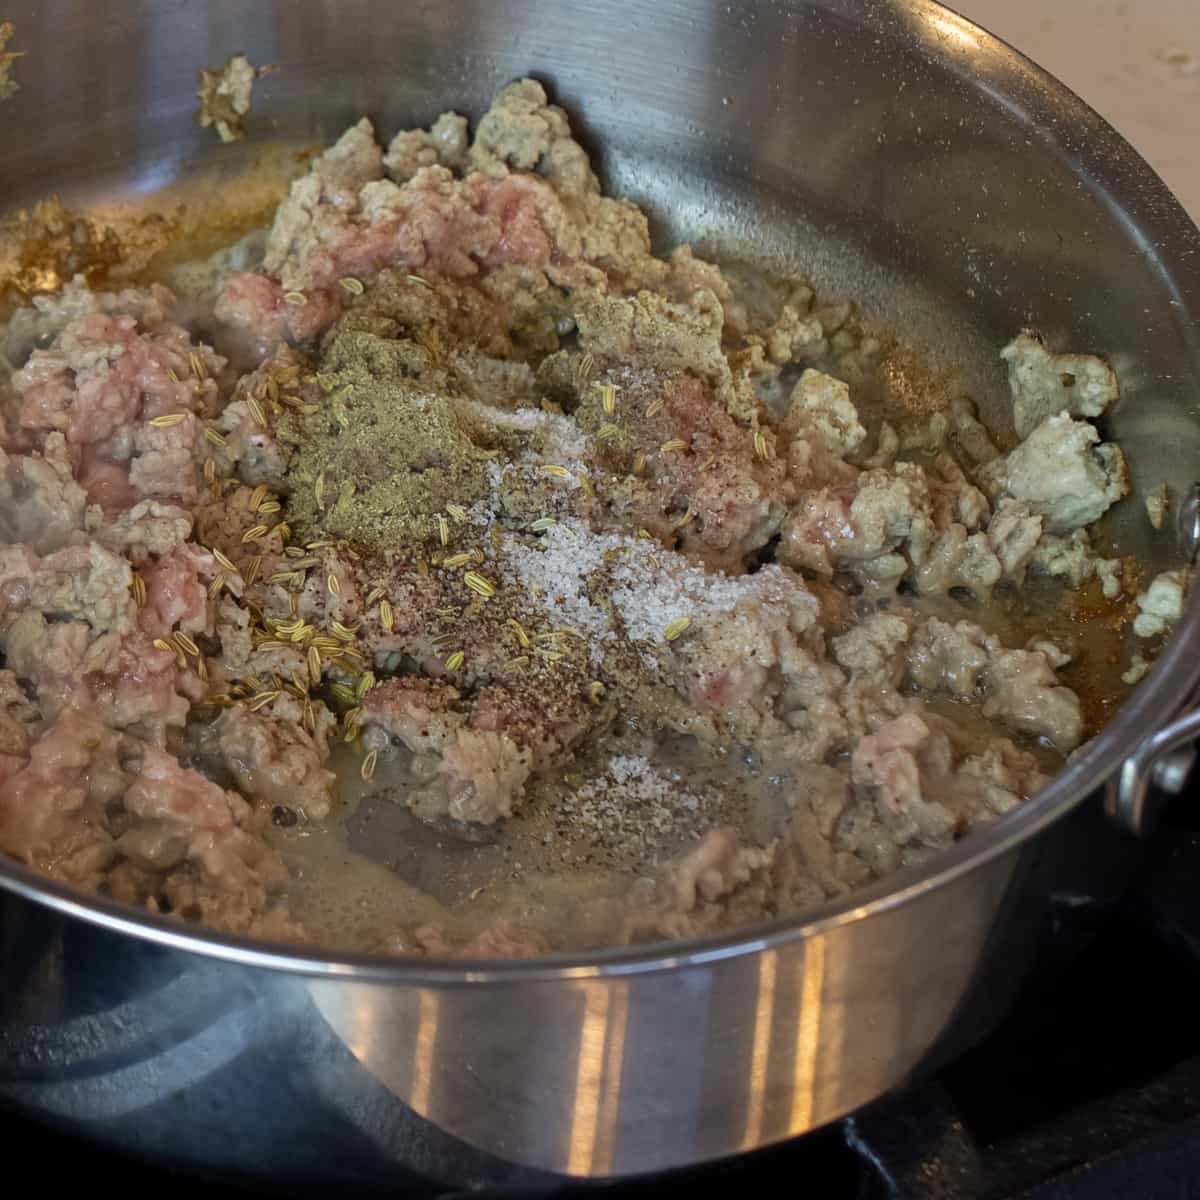 Spices on cooked ground chicken in a skillet.